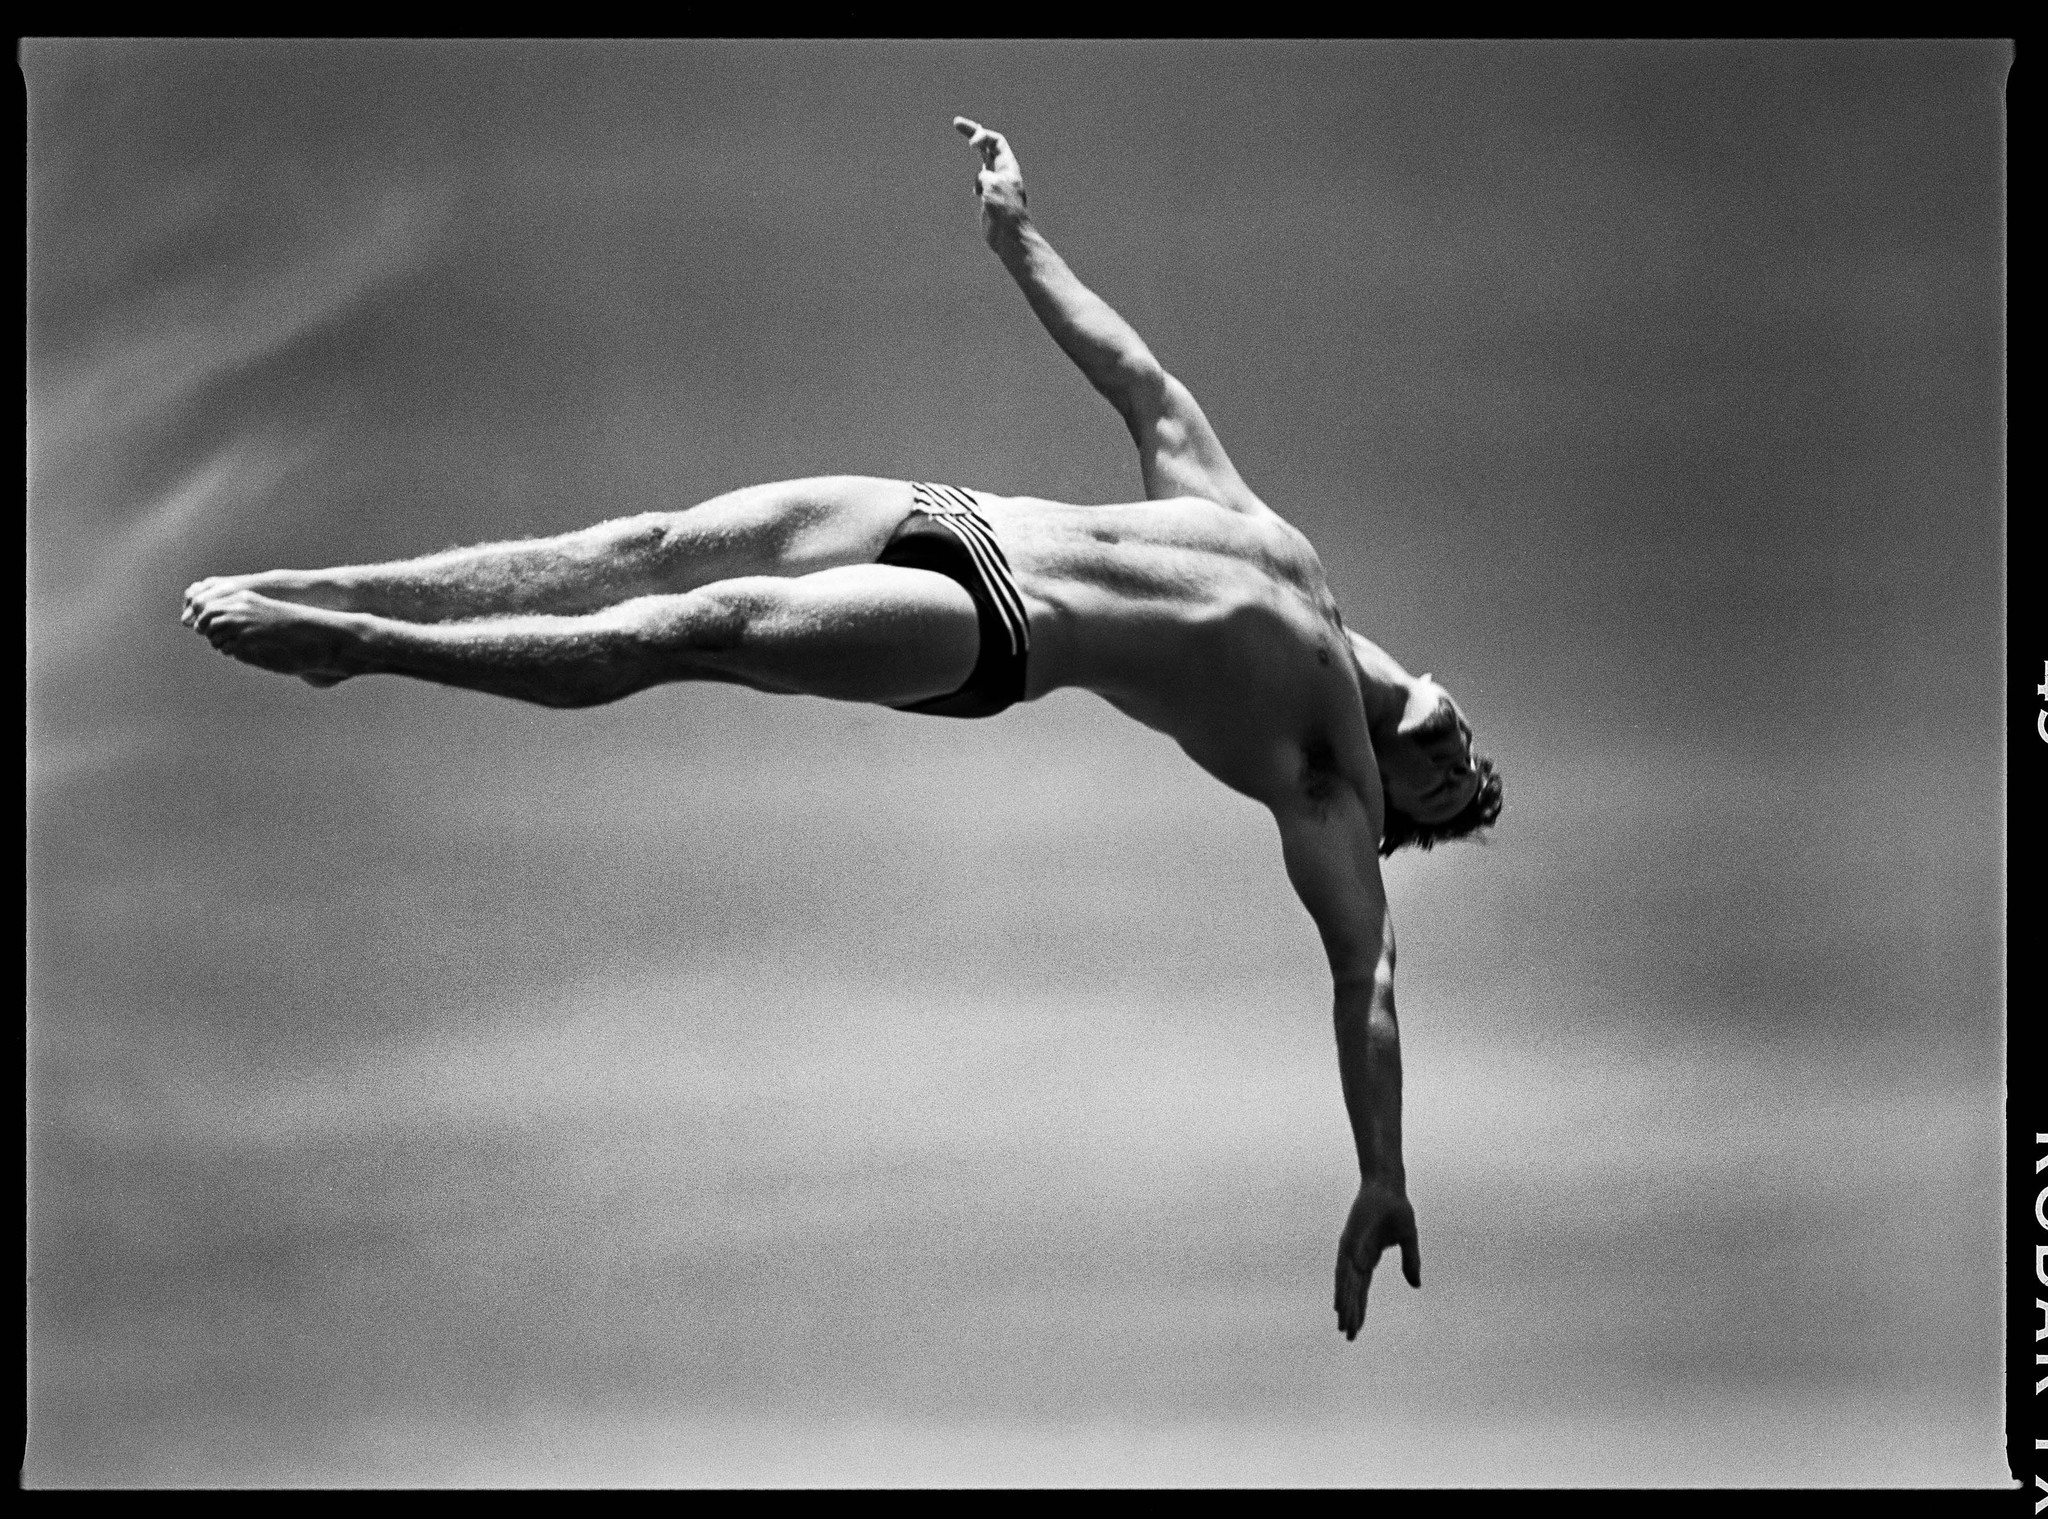 A platform diver at the U.S. Olympics trials in Florida in 1996.